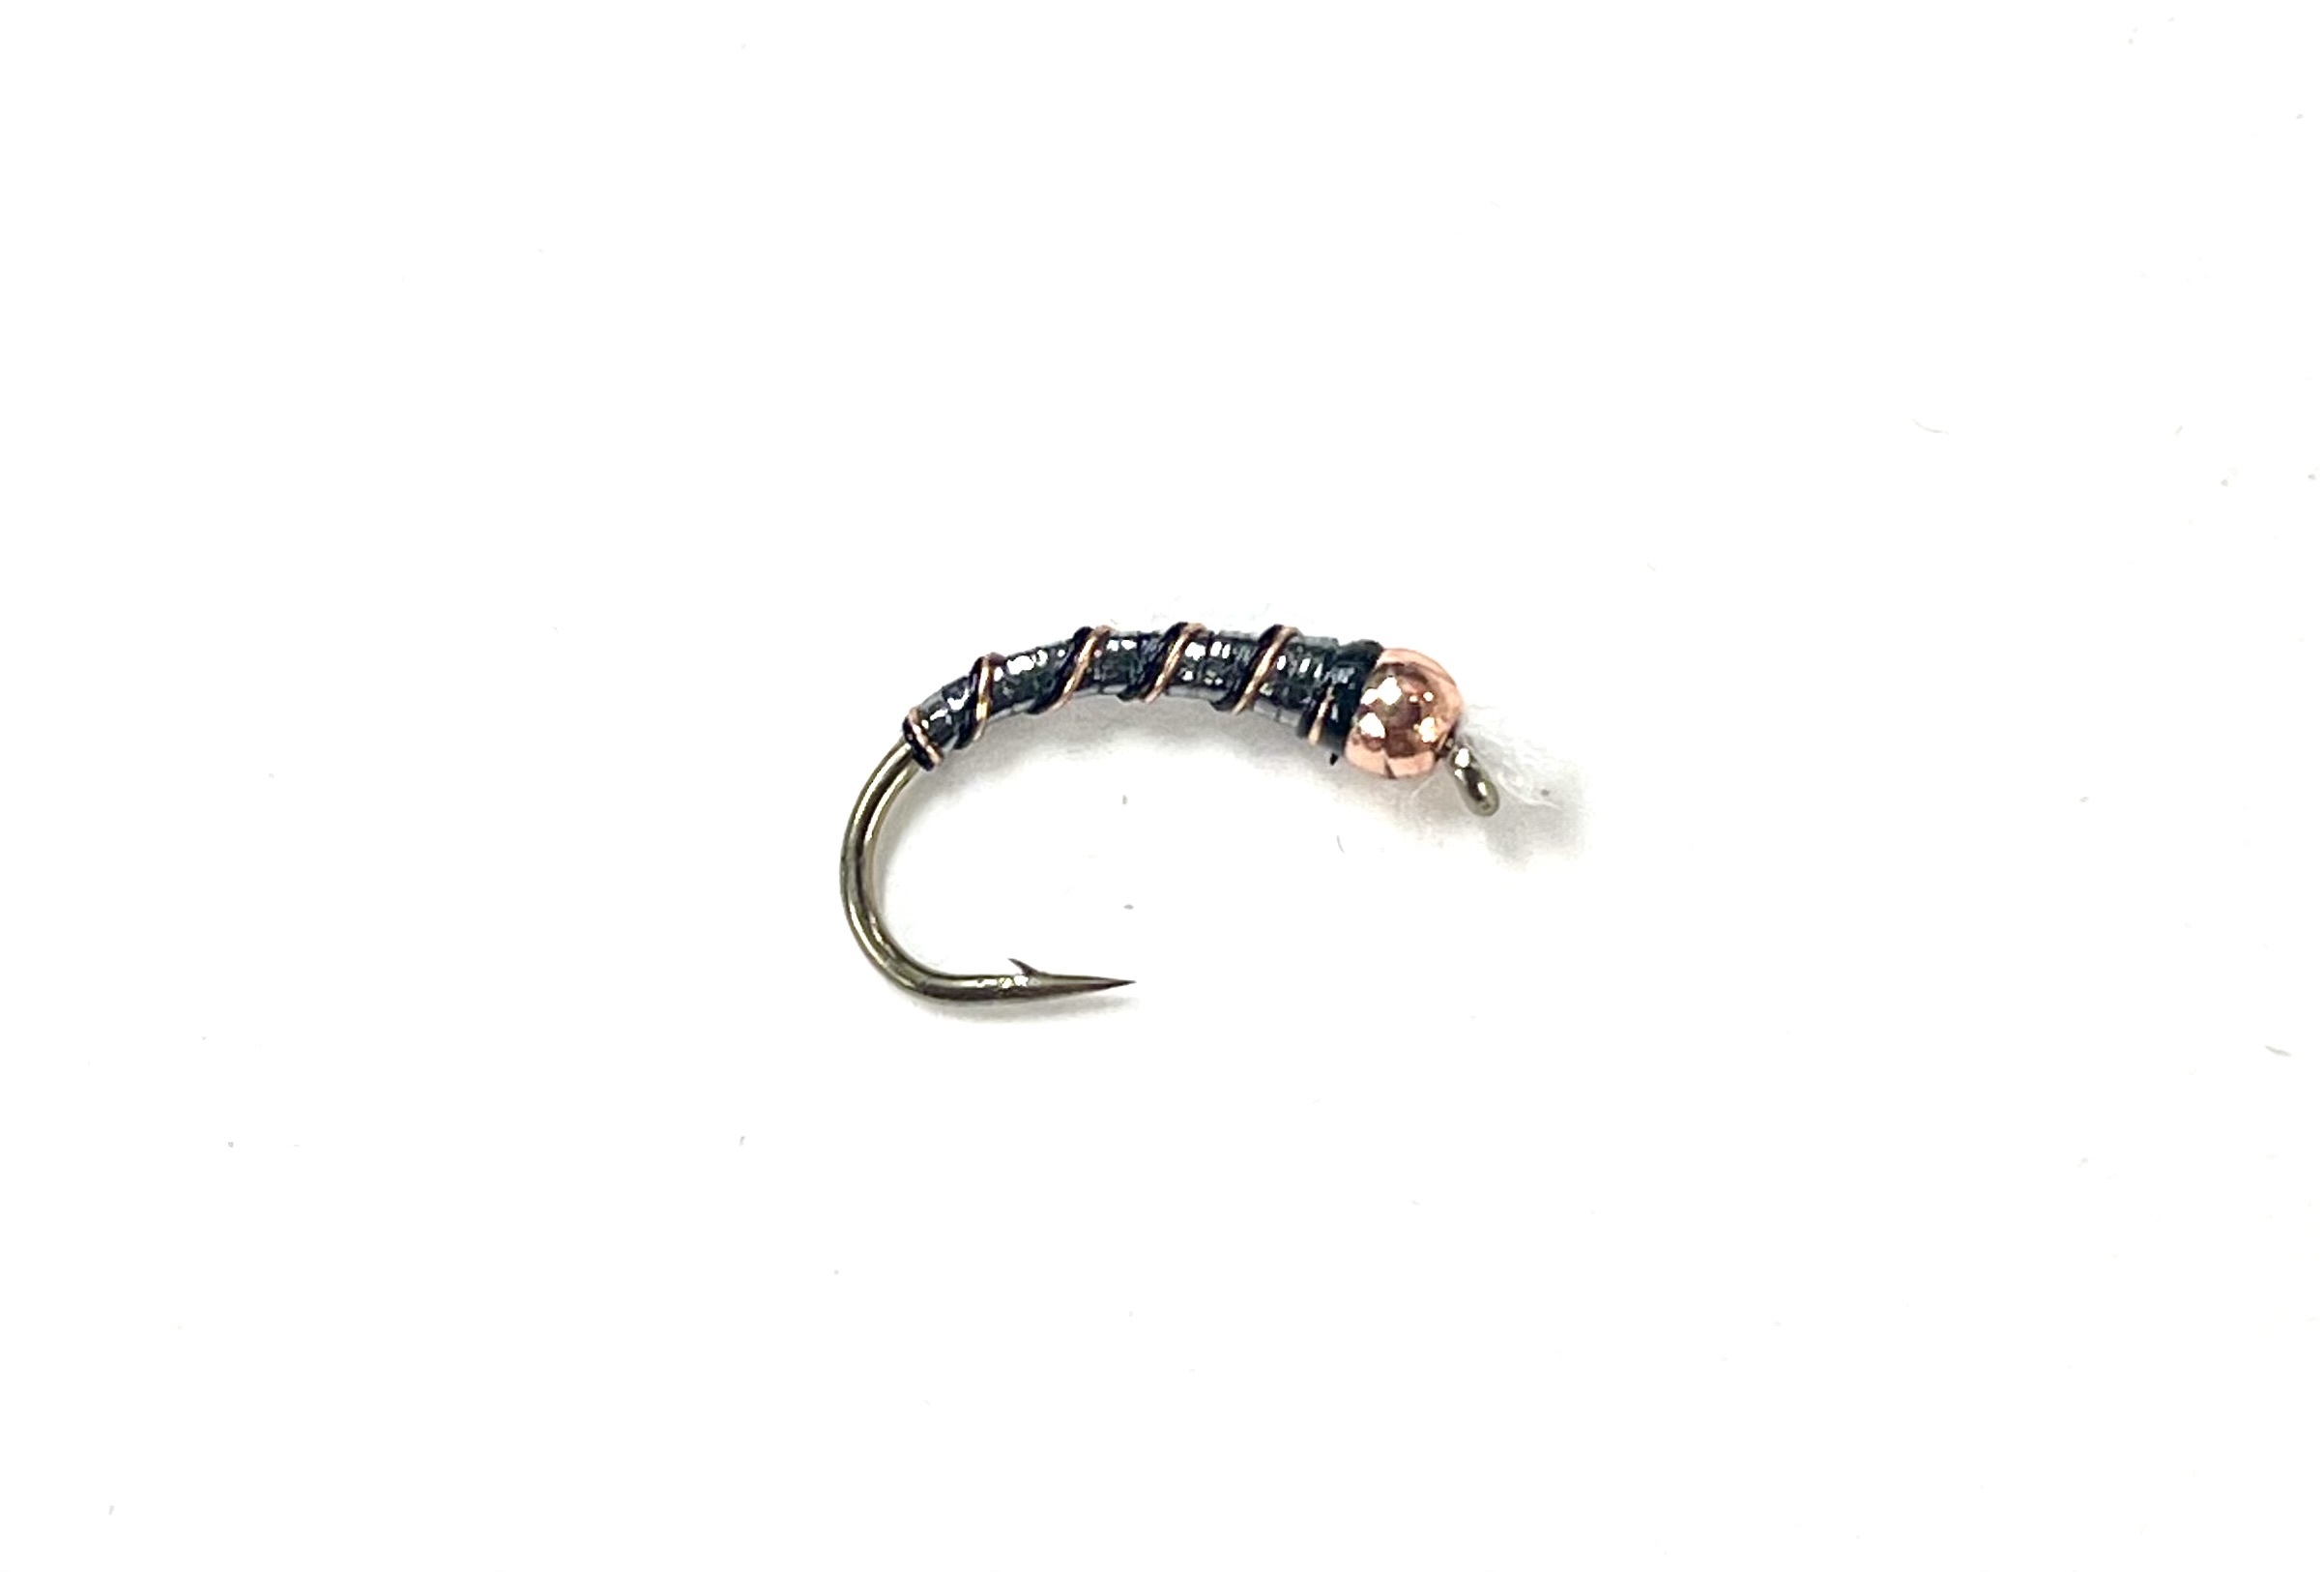 M&Y Copper Bead ASB Double Rib Chironomid - Size 18